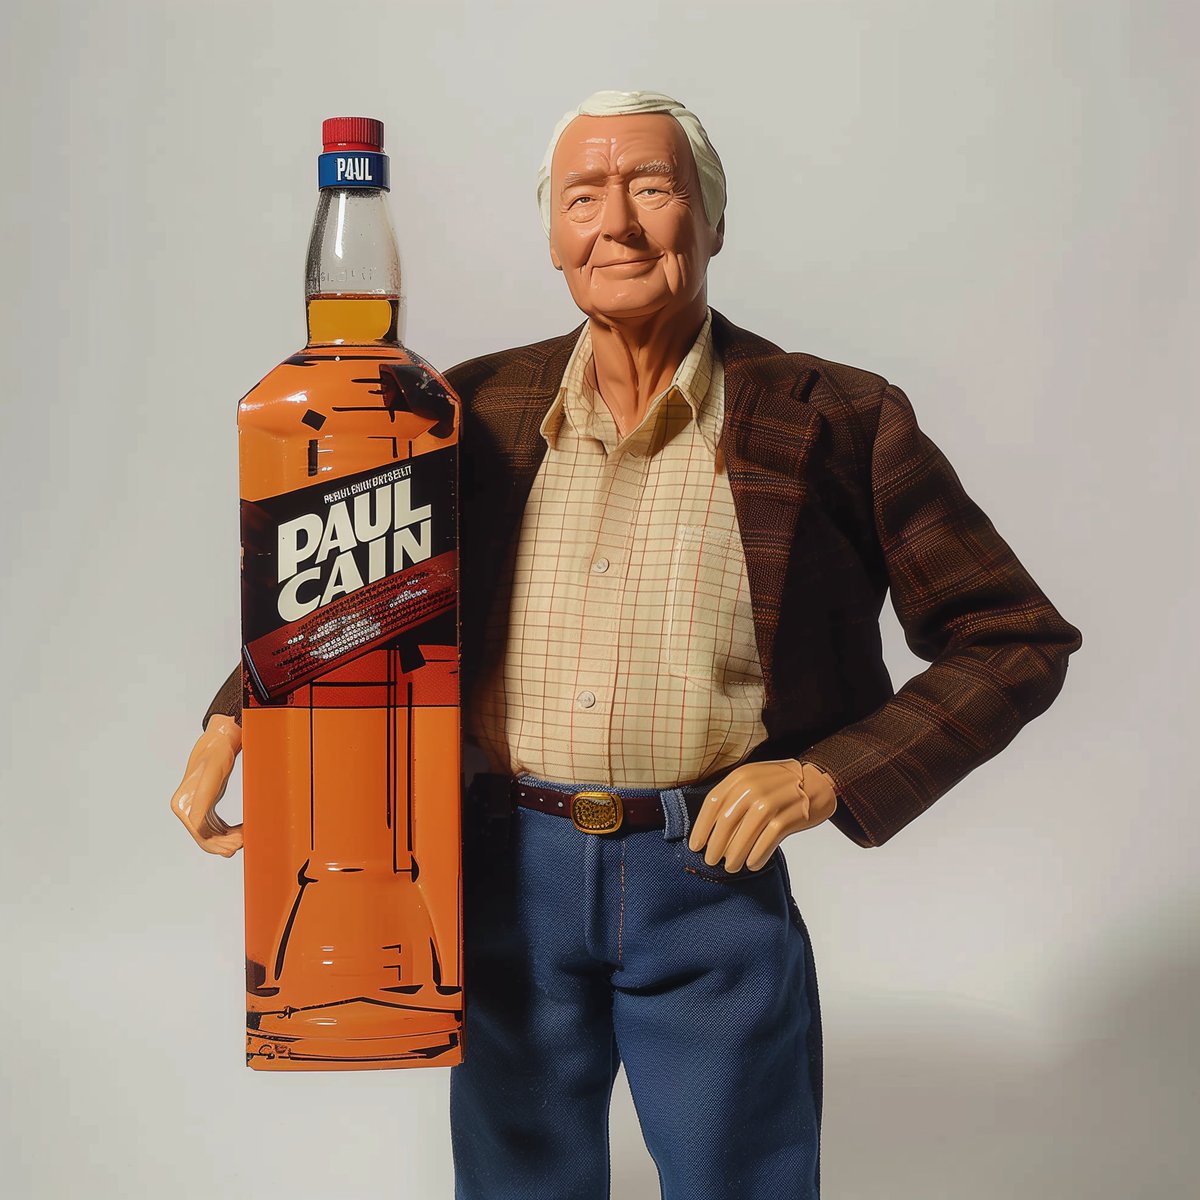 LIMITED EDITION PAUL CAIN PLAYSET WITH REAL WHISKEY (BLEND)

#ihopkc #mikebickle #paulcain